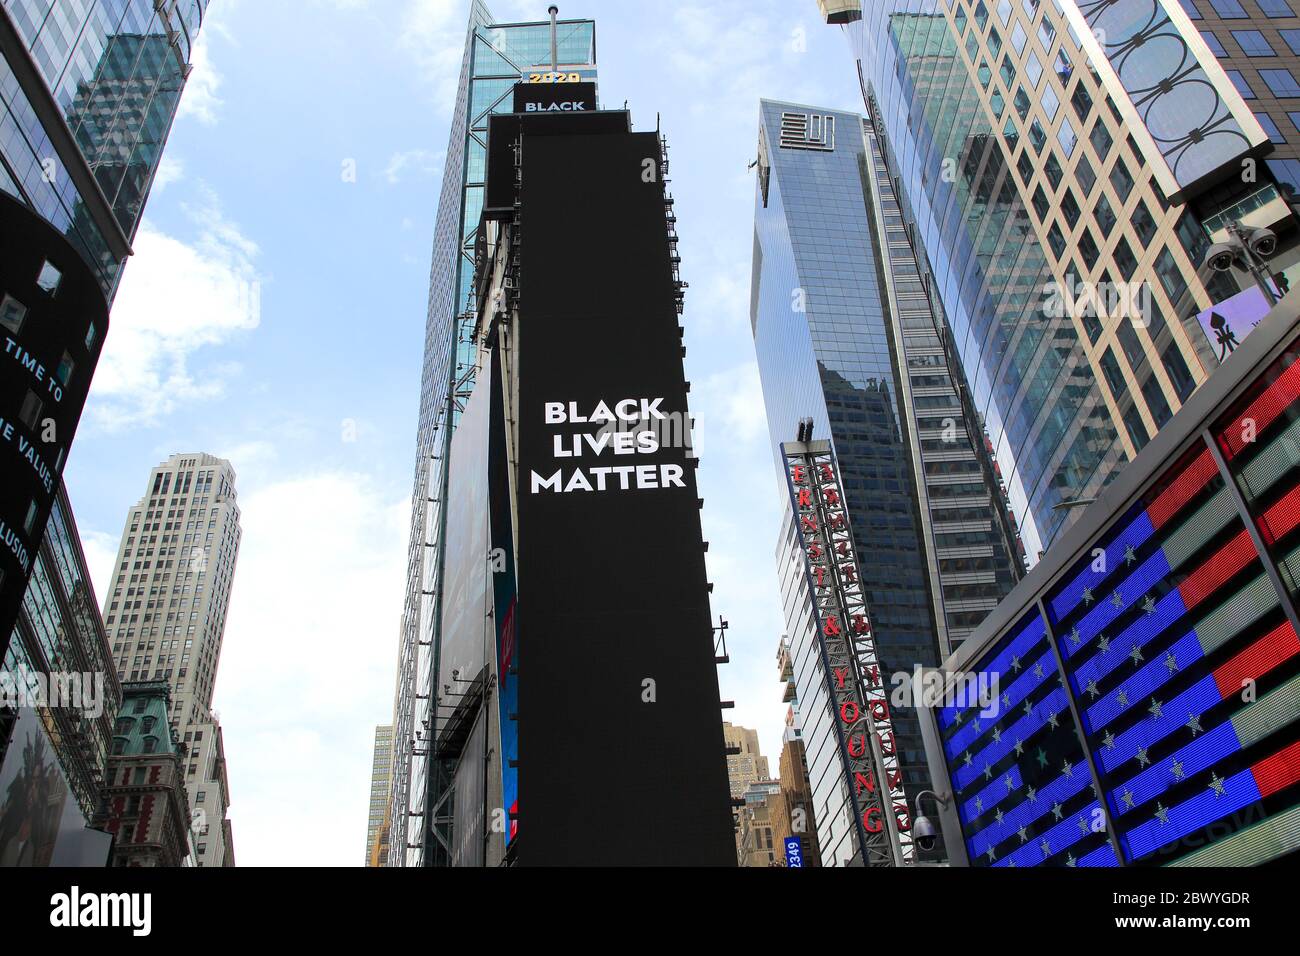 Black Lives Matter billboard in Times Square.  The death of George Floyd while in the custody of Minneapolis police has prompted nationwide protests around the United States demanding justice and social change. 1 Times Square, Manhattan, New York City USA. June 2, 2020 Stock Photo